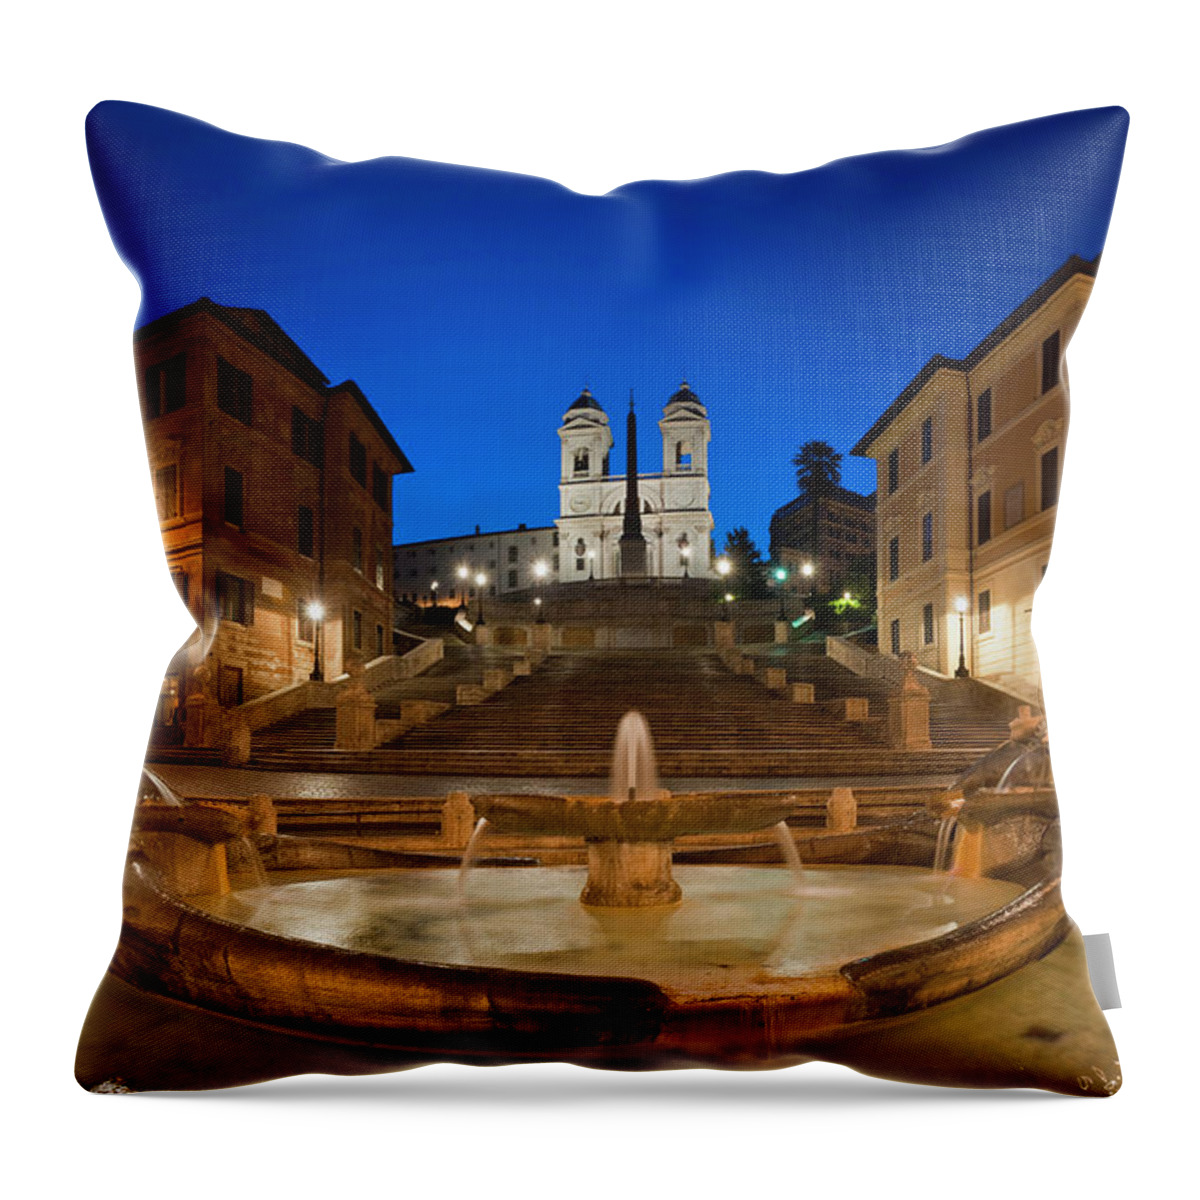 Steps Throw Pillow featuring the photograph Spanish Steps Piazza Di Spagna Fontana by Fotovoyager